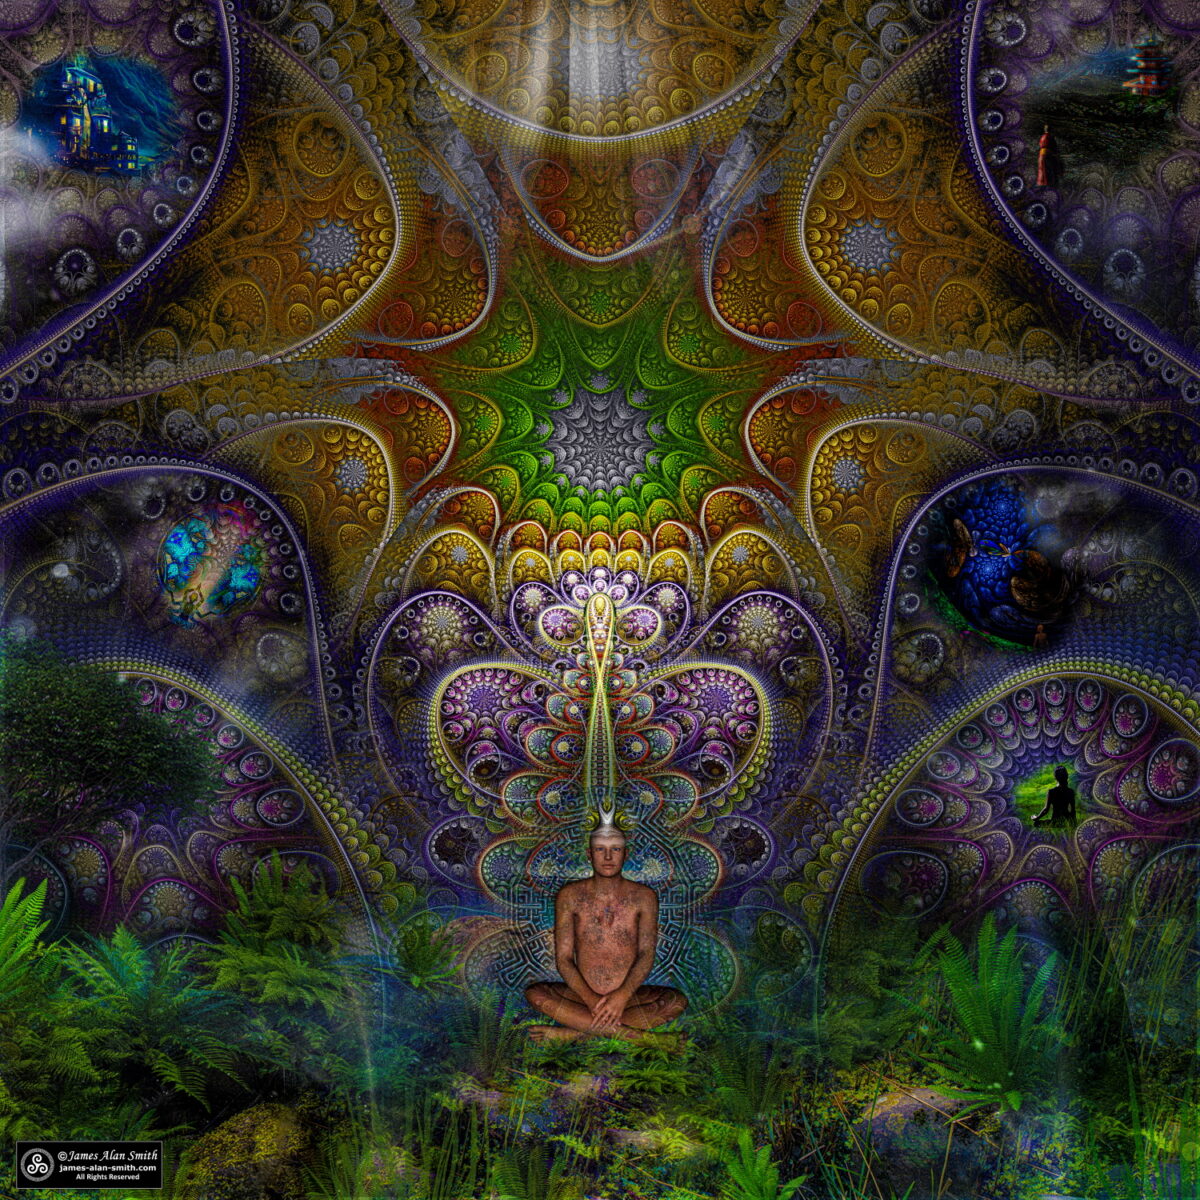 Meditations of the Sage: Artwork by James Alan Smith